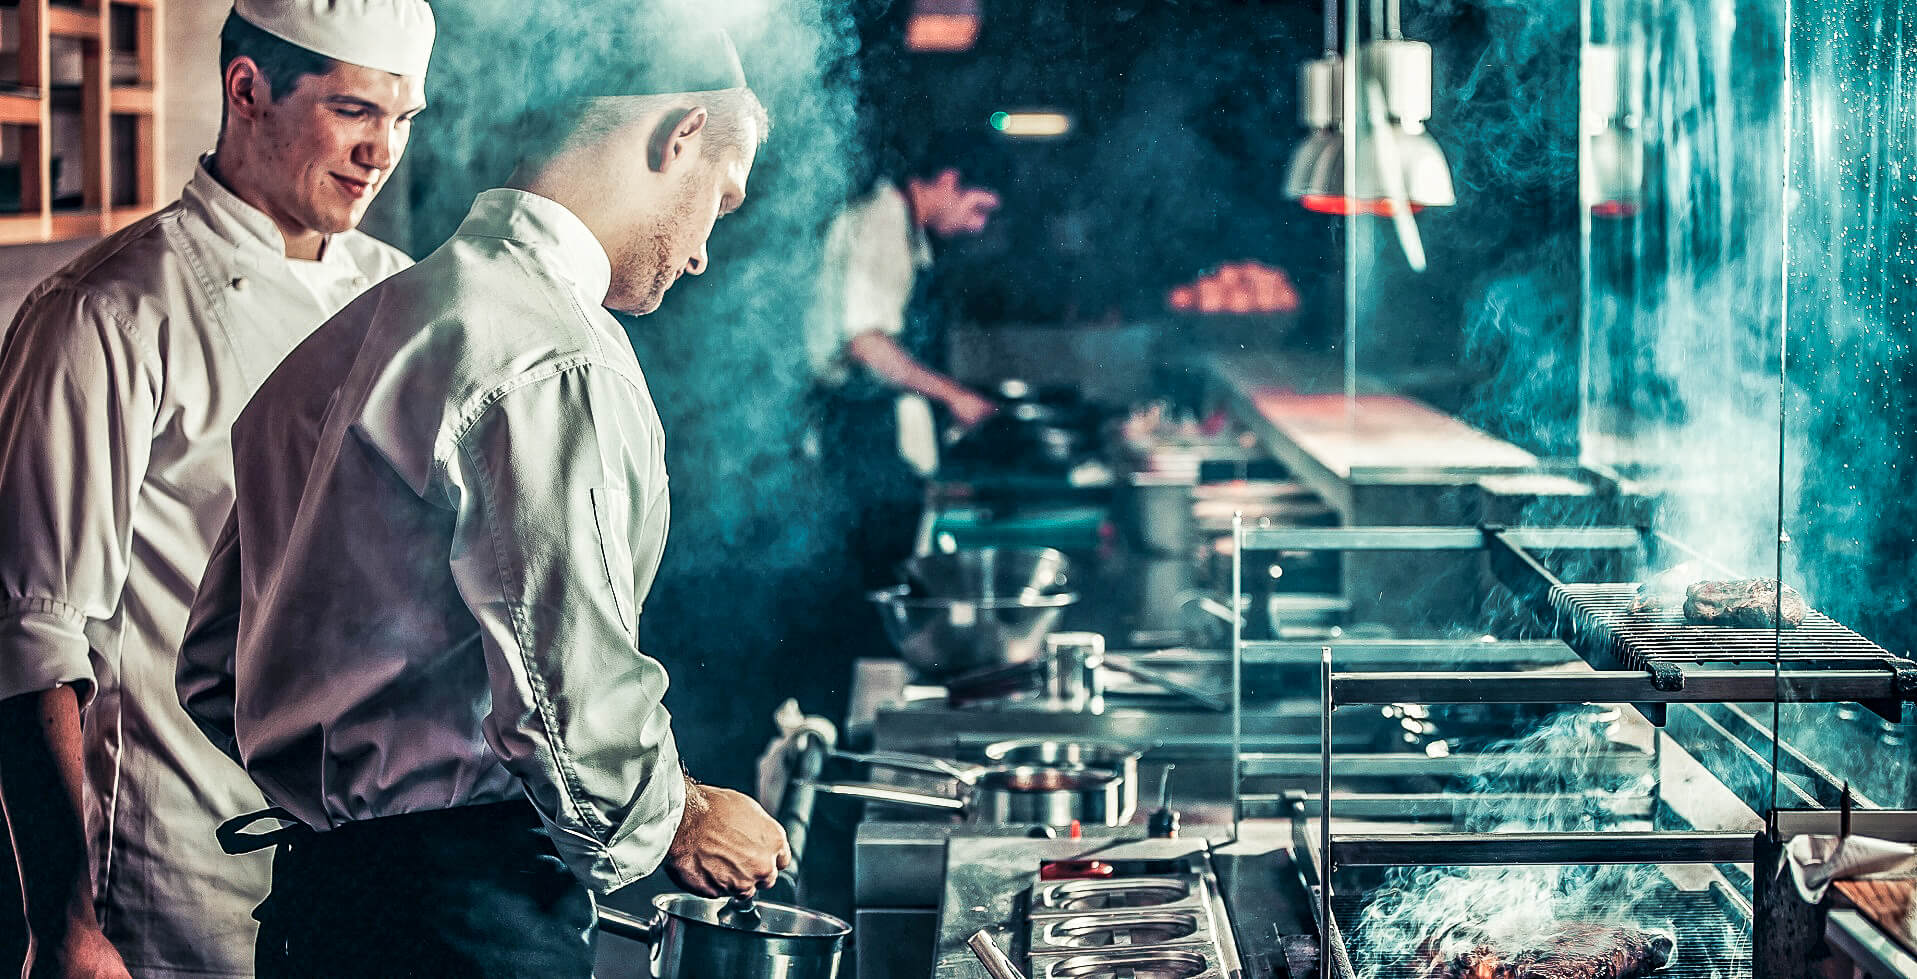 Kitchen staff should be regularly trained on the subject of energy waste